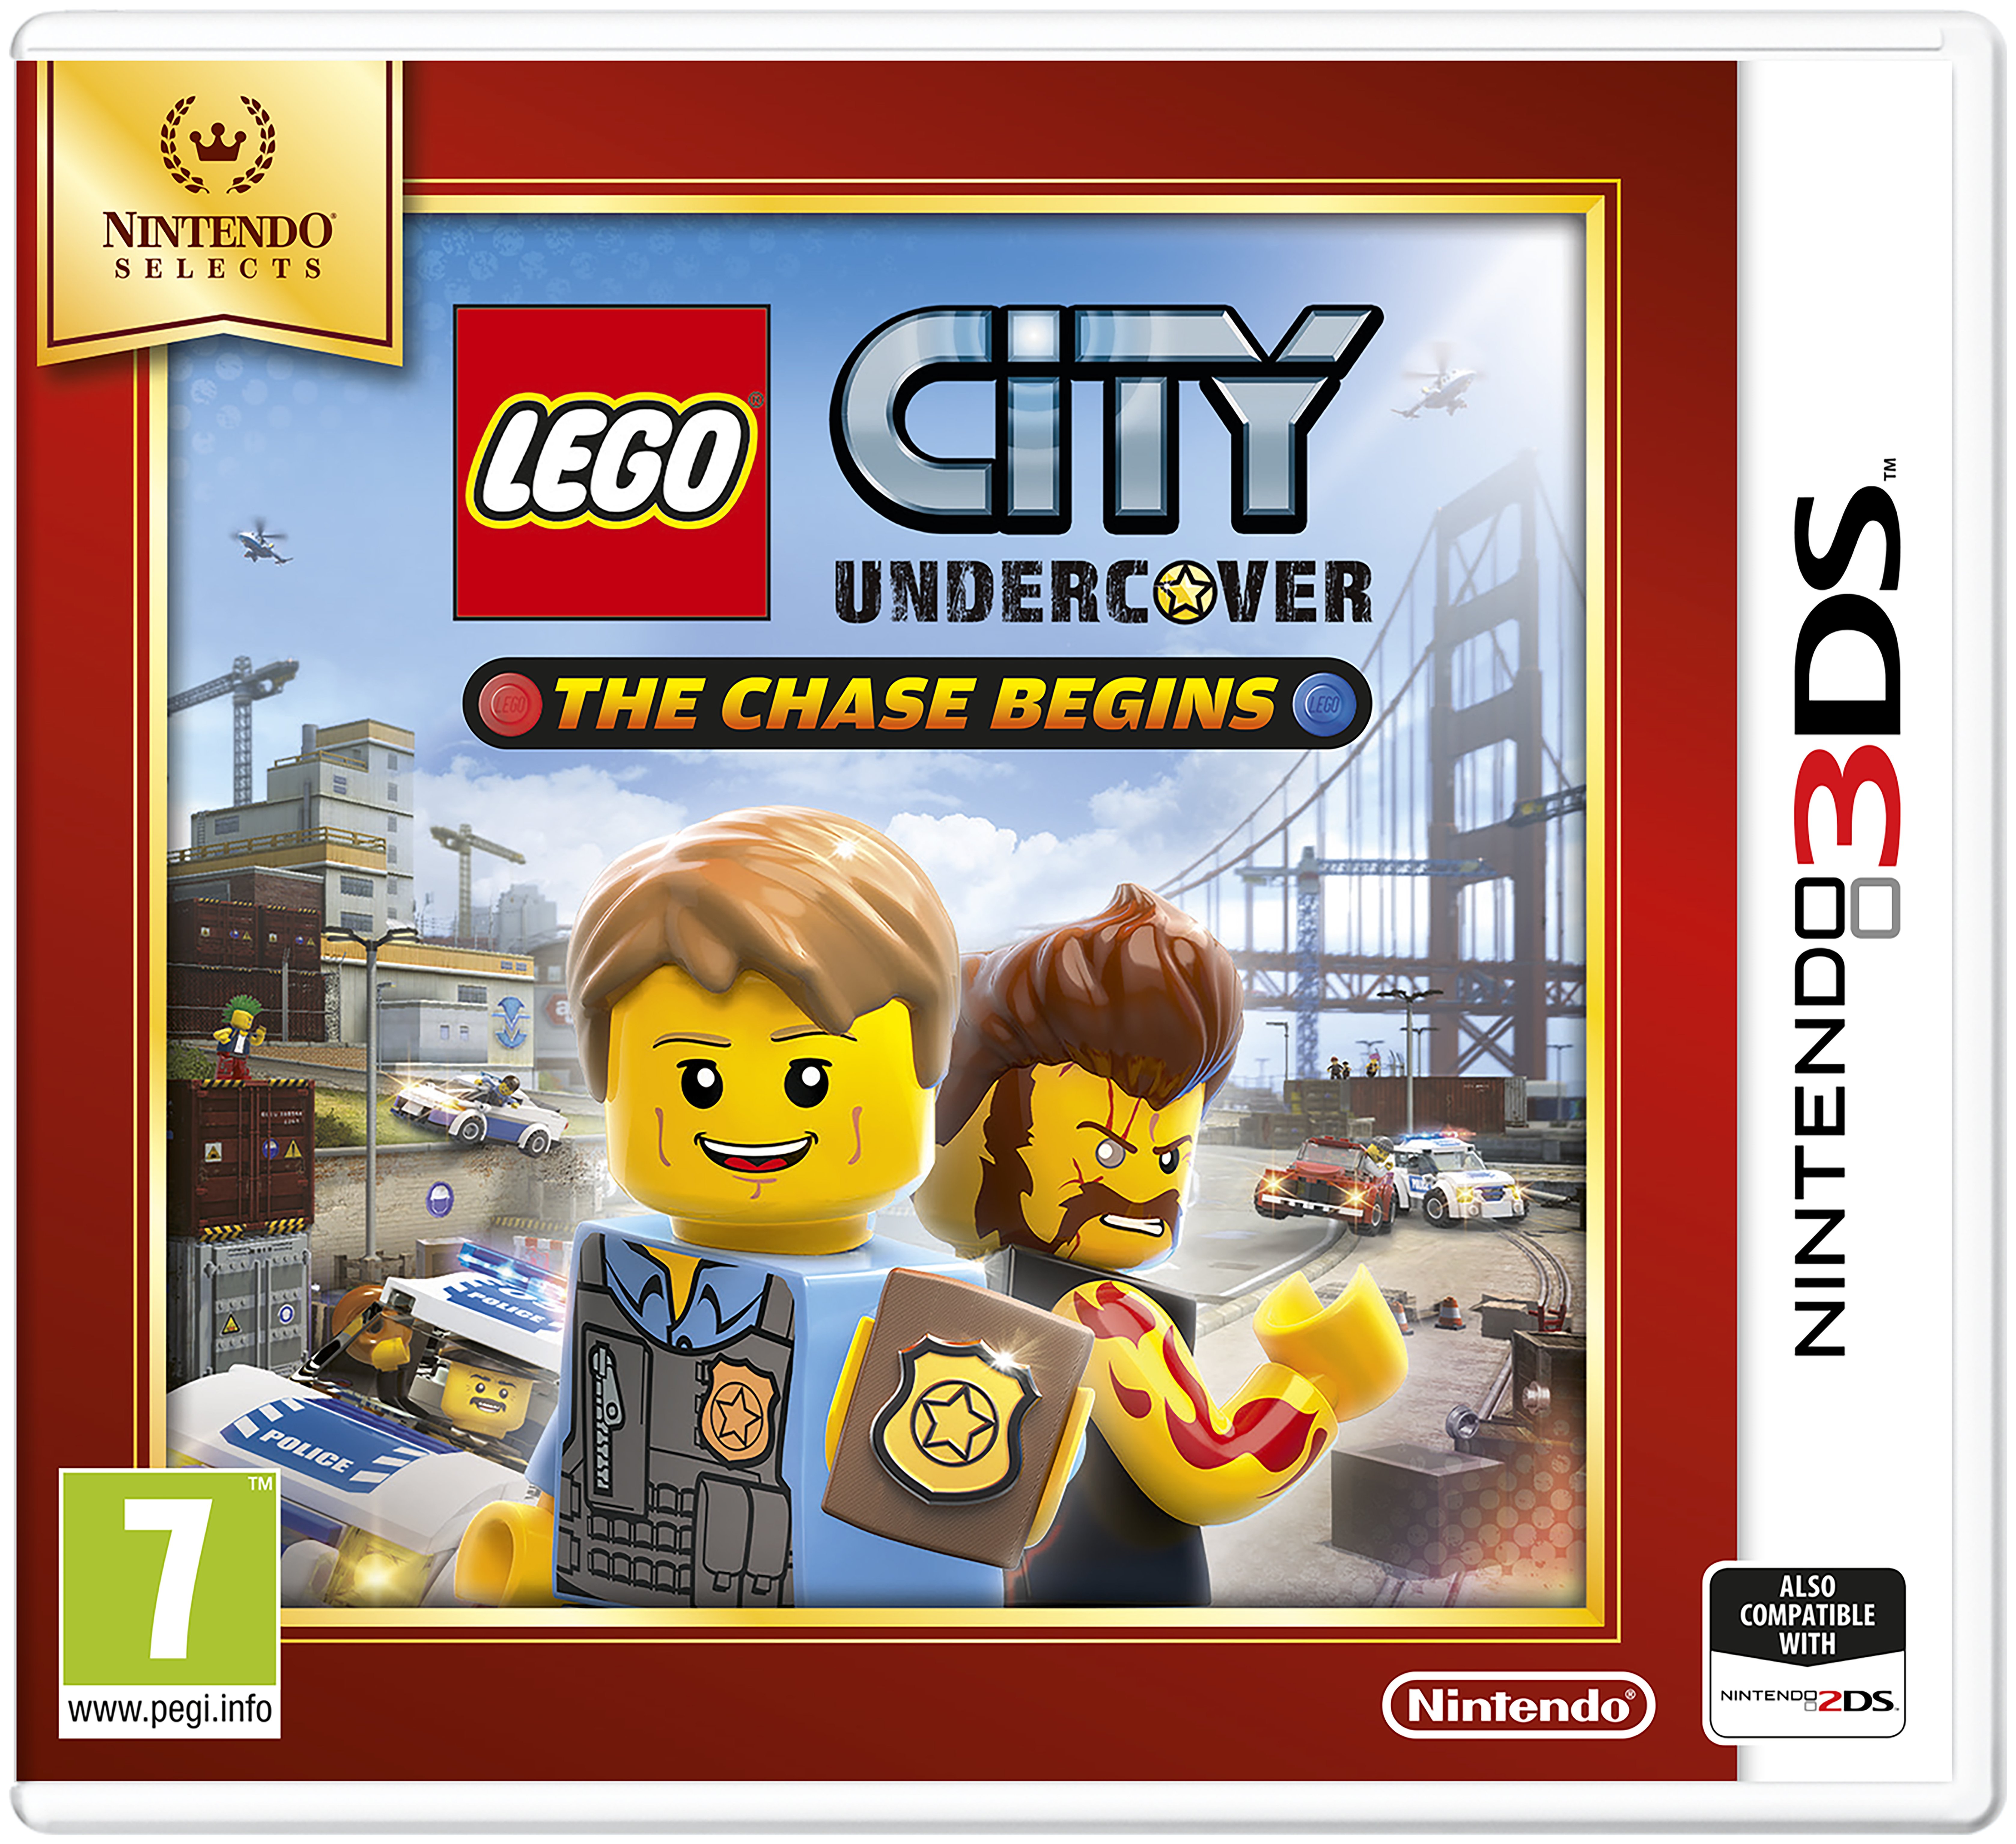 LEGO City Undercover: The Chase Begins Selects 3DS Game Review